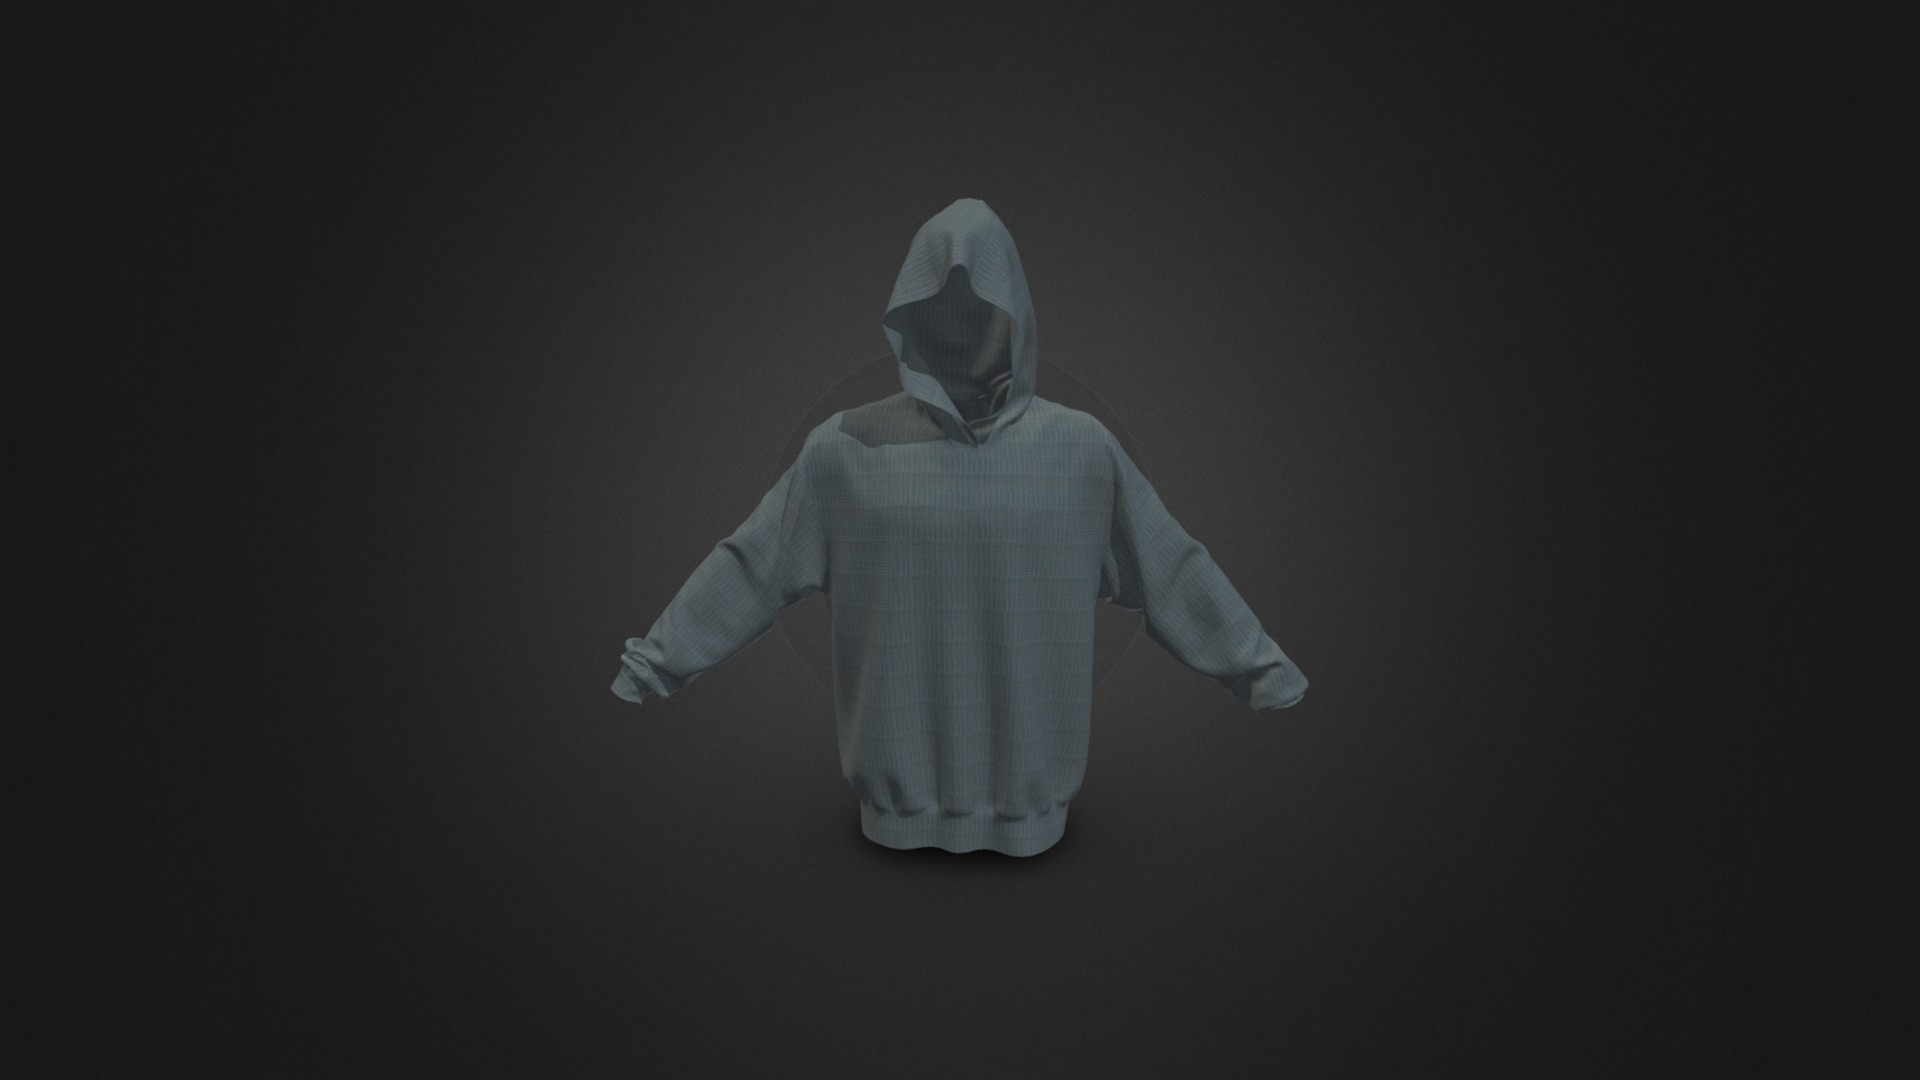 3D model hoody - This is a 3D model of the hoody. The 3D model is about a person in a garment.